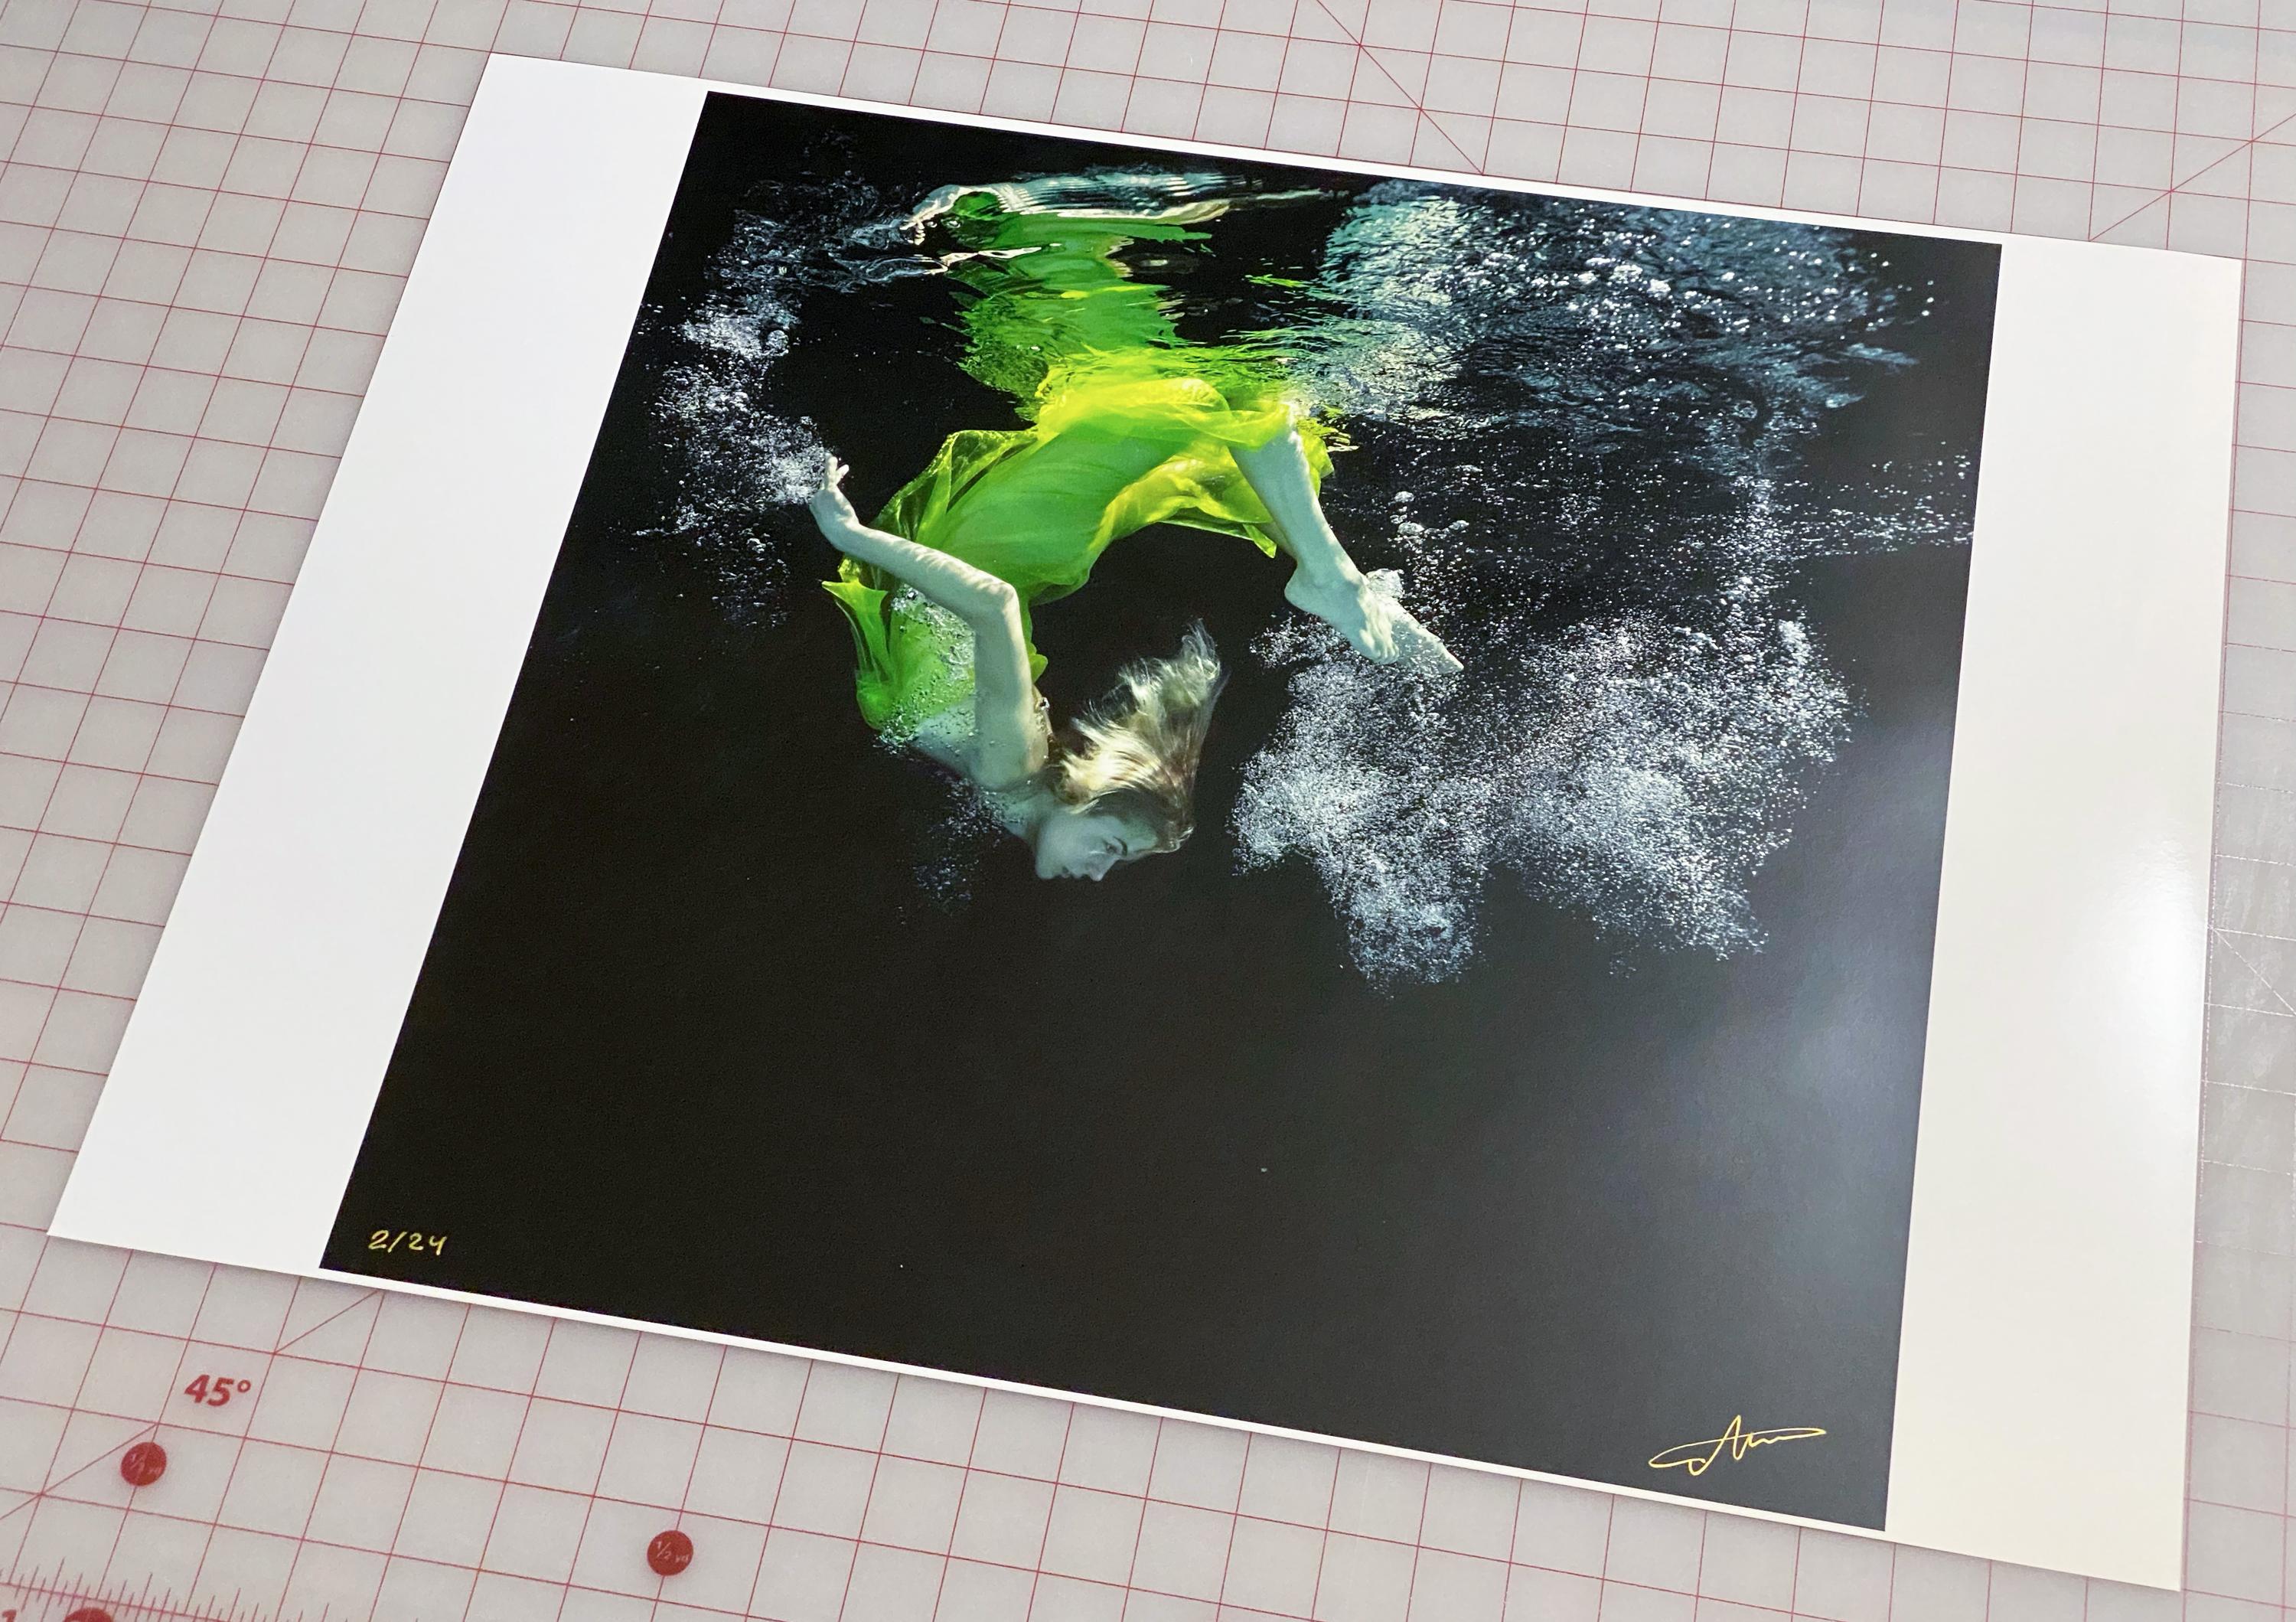 An underwater photograph of a young woman wrapped in bright green tulle. 

Original gallery quality print signed by the artist. 
Digital archival pigment print on archival paper with metallic finish. 
Limited edition of 24
The artwork is furnished